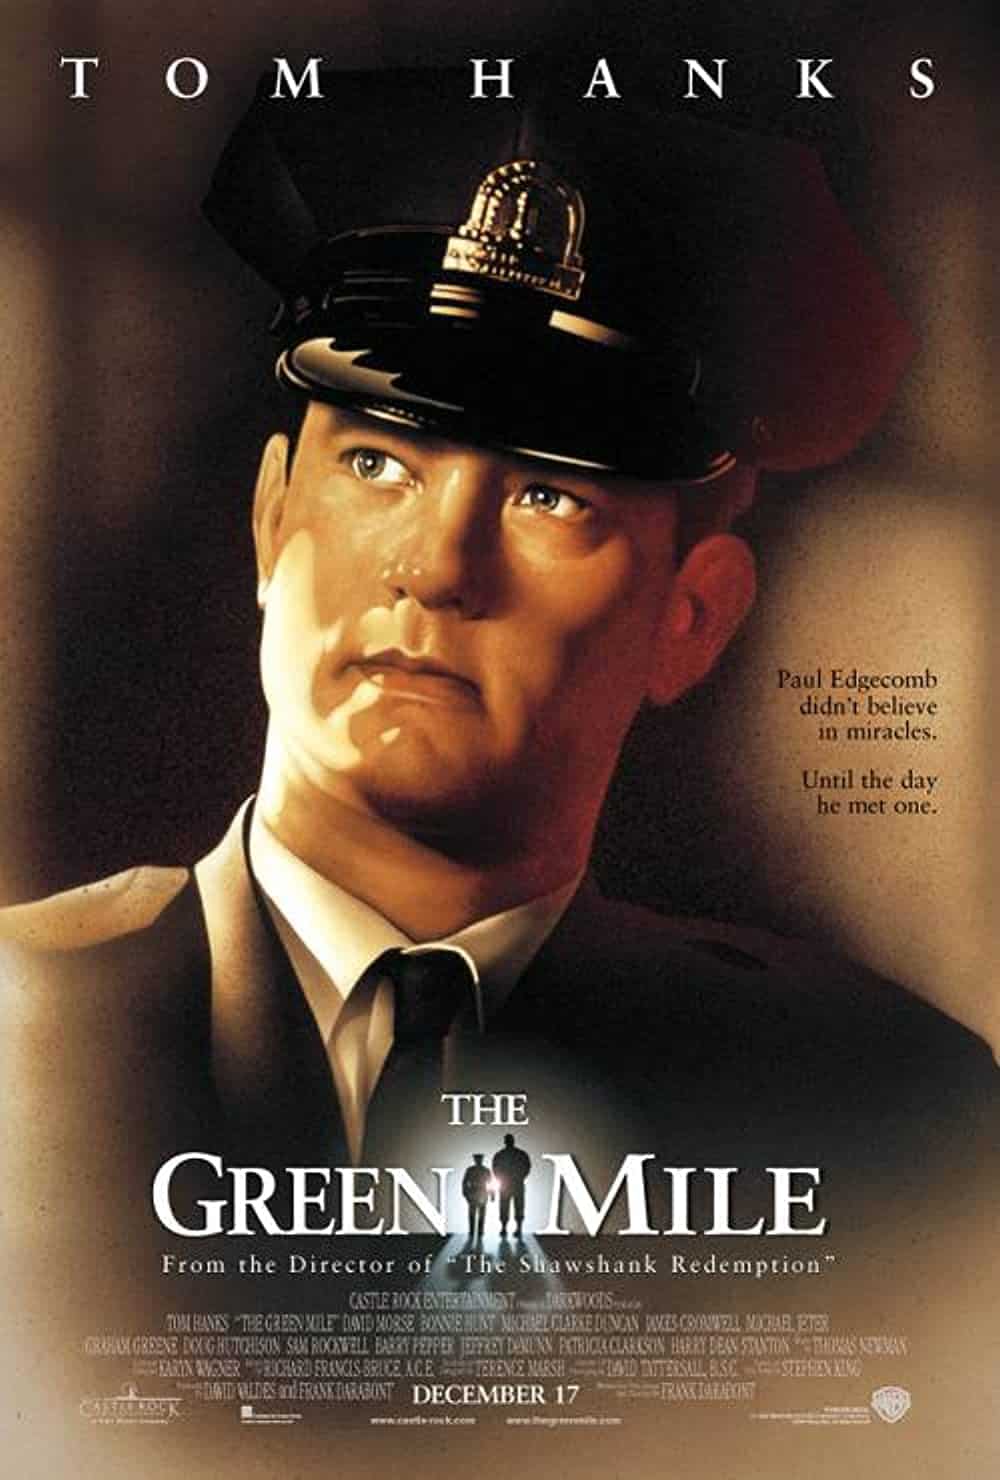 Best Prison Movies You Can't Miss The Green Mile (1999)